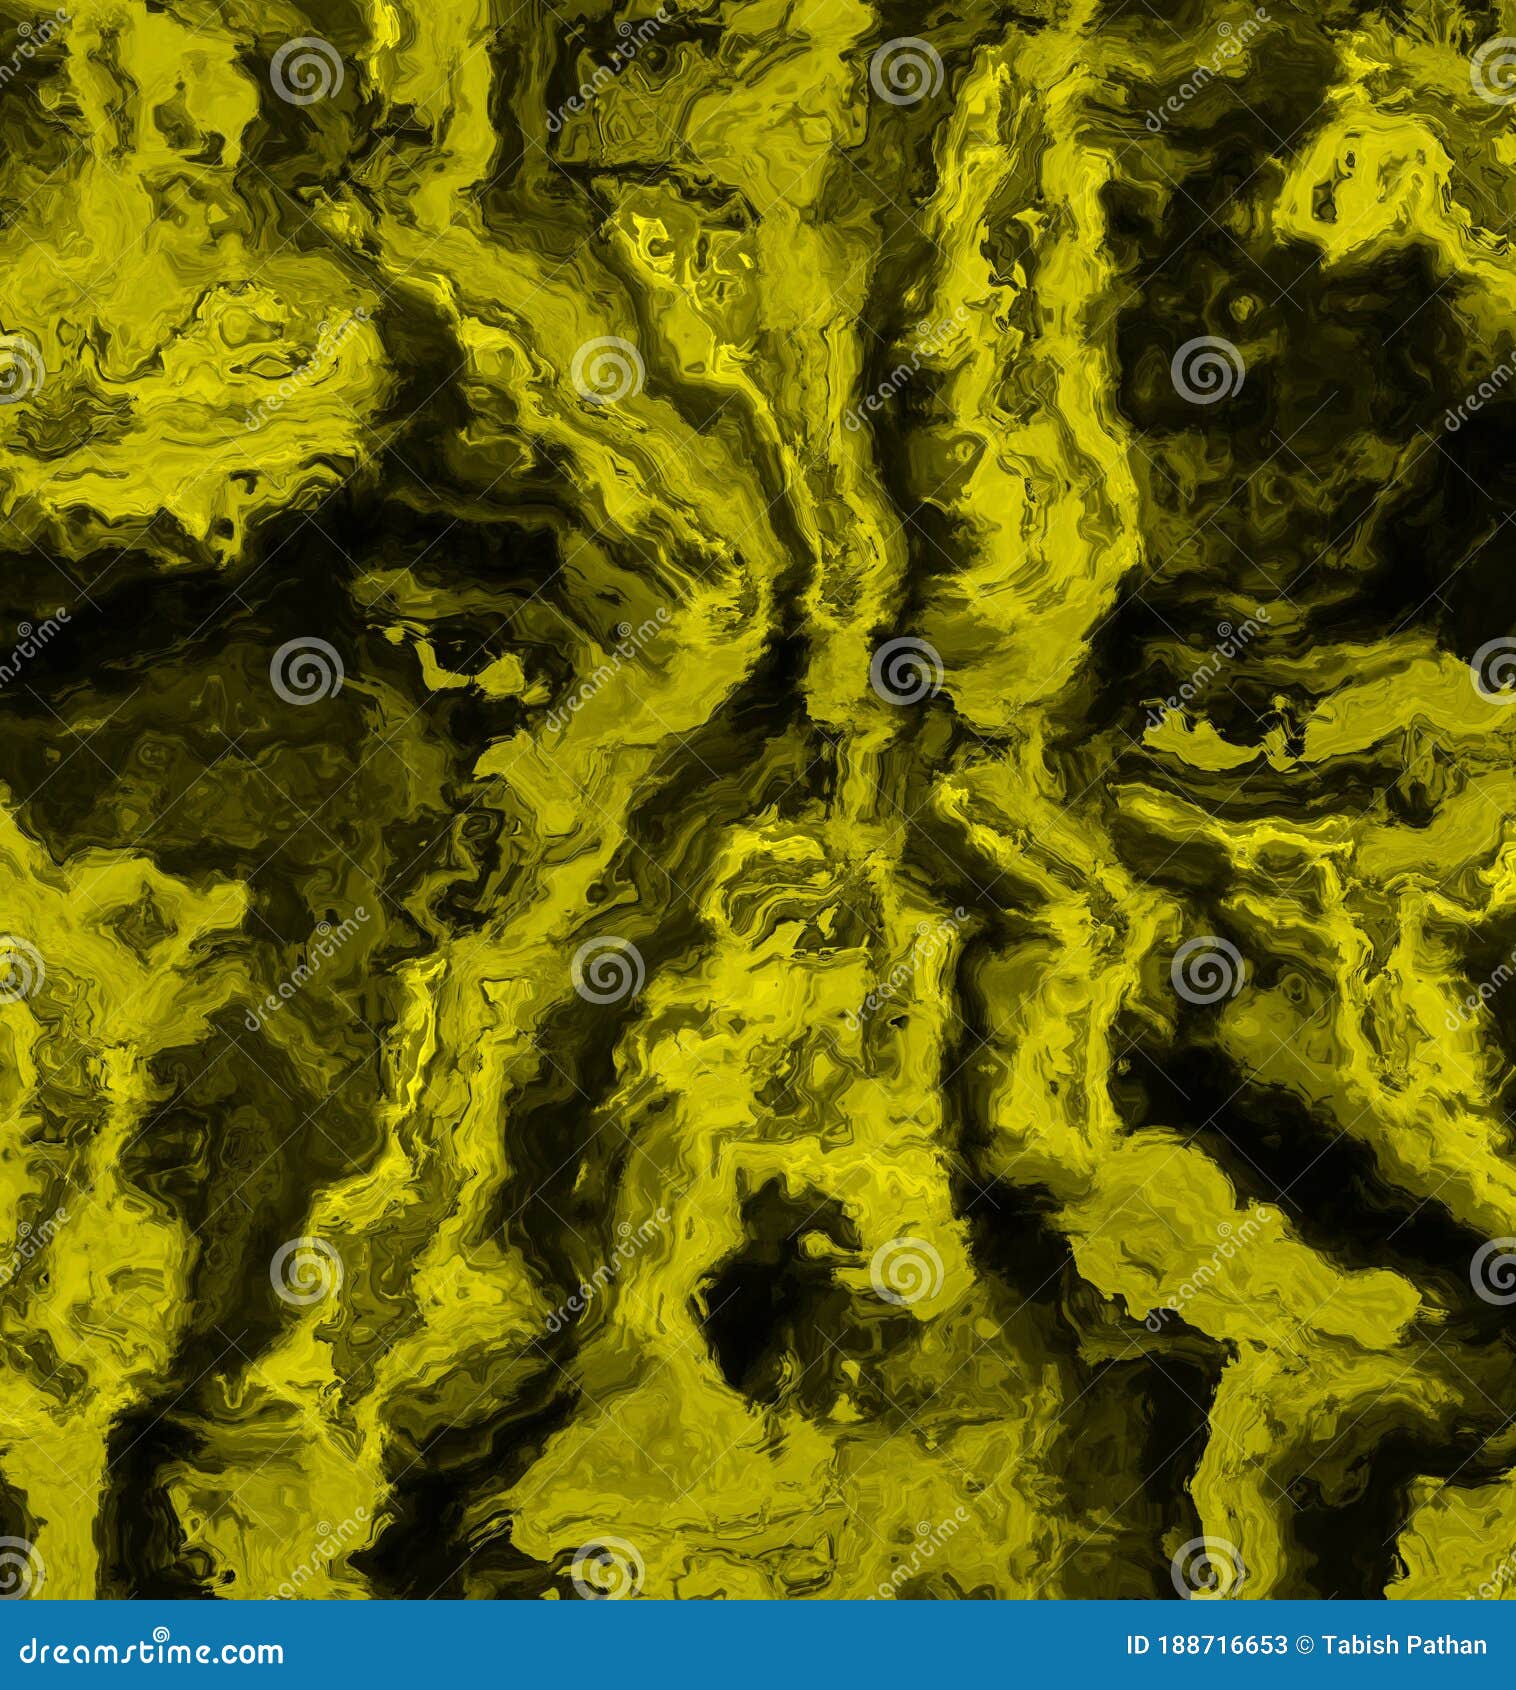 wavy and haphazard mixing of yellow shades on black canvas